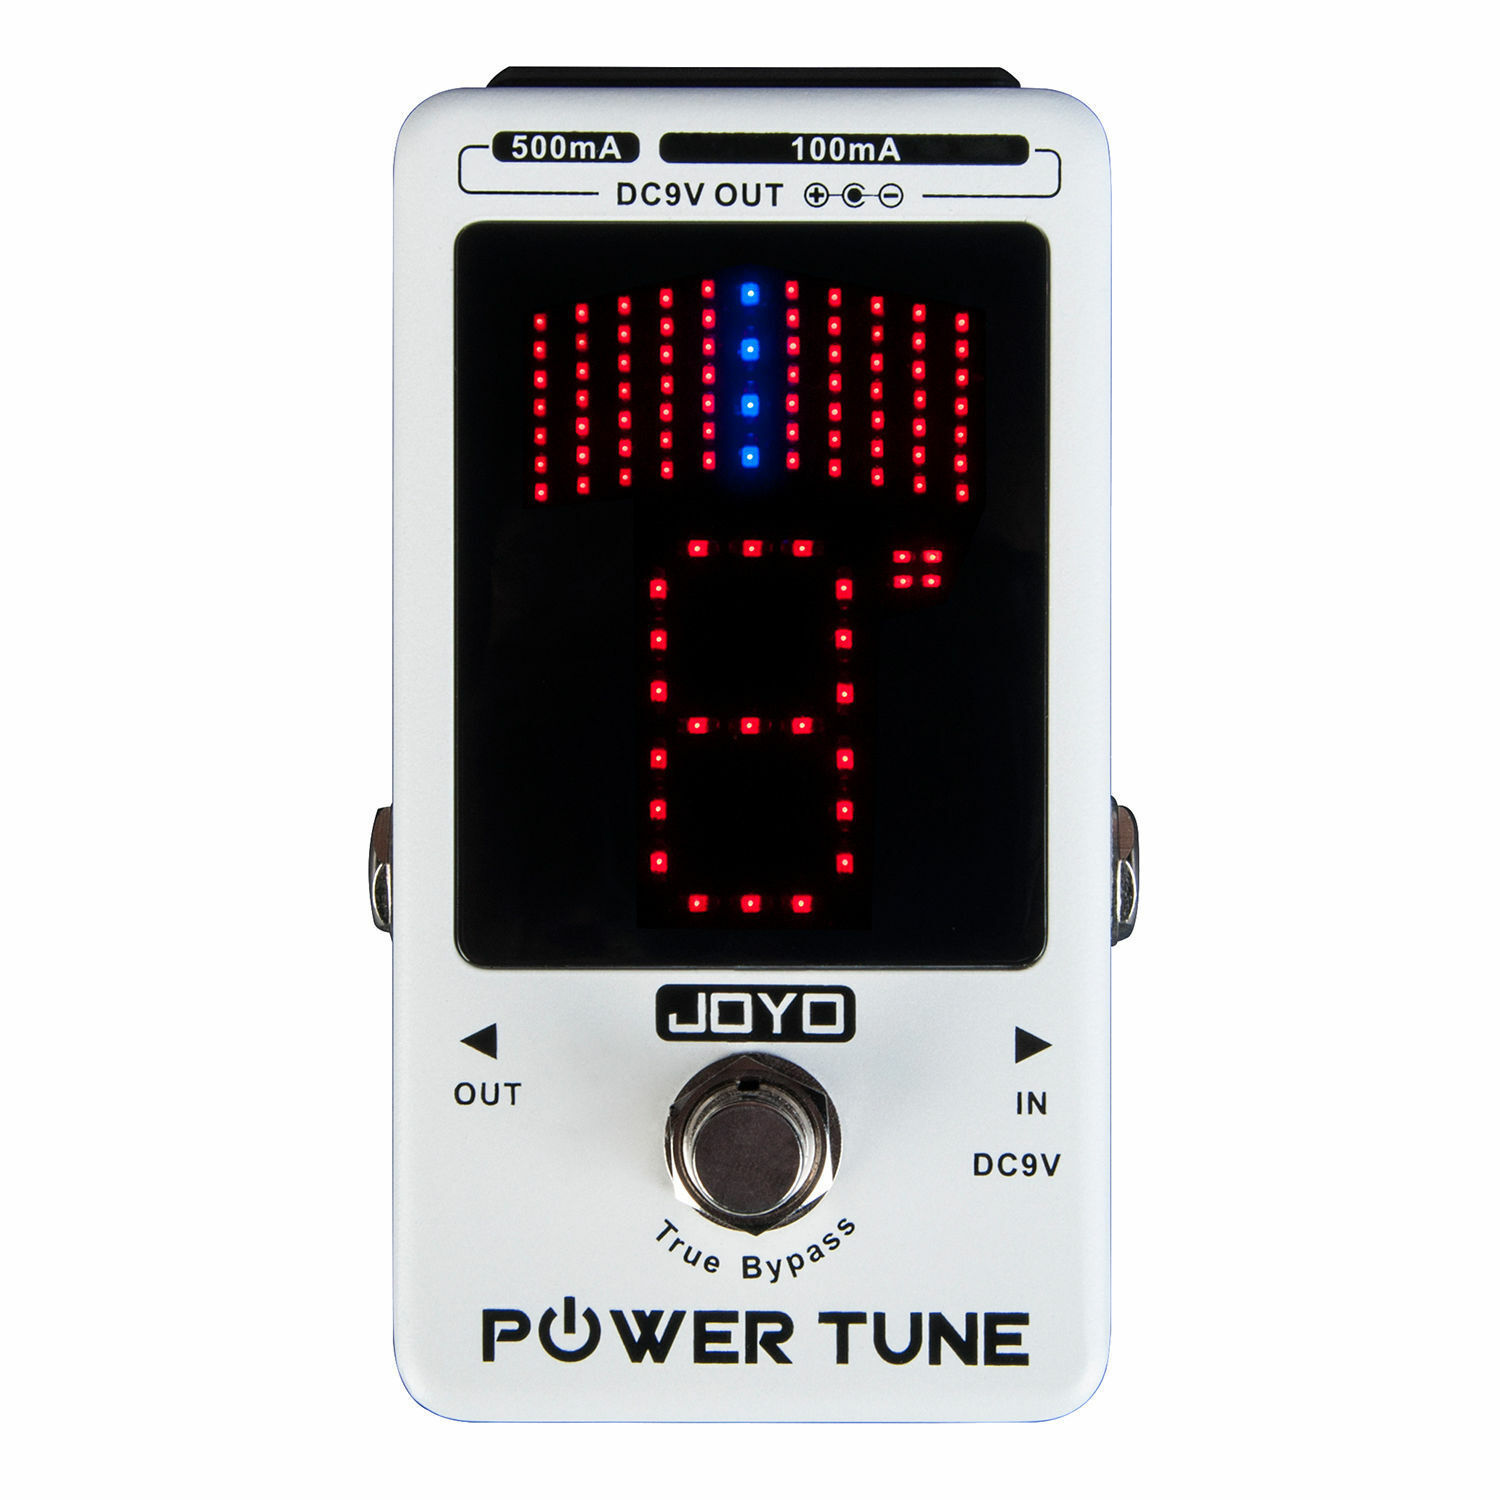 JOYO JF-18R Power Tune Guitar Chromatic Tuner FX Power Supply In one 8 Output - $78.80